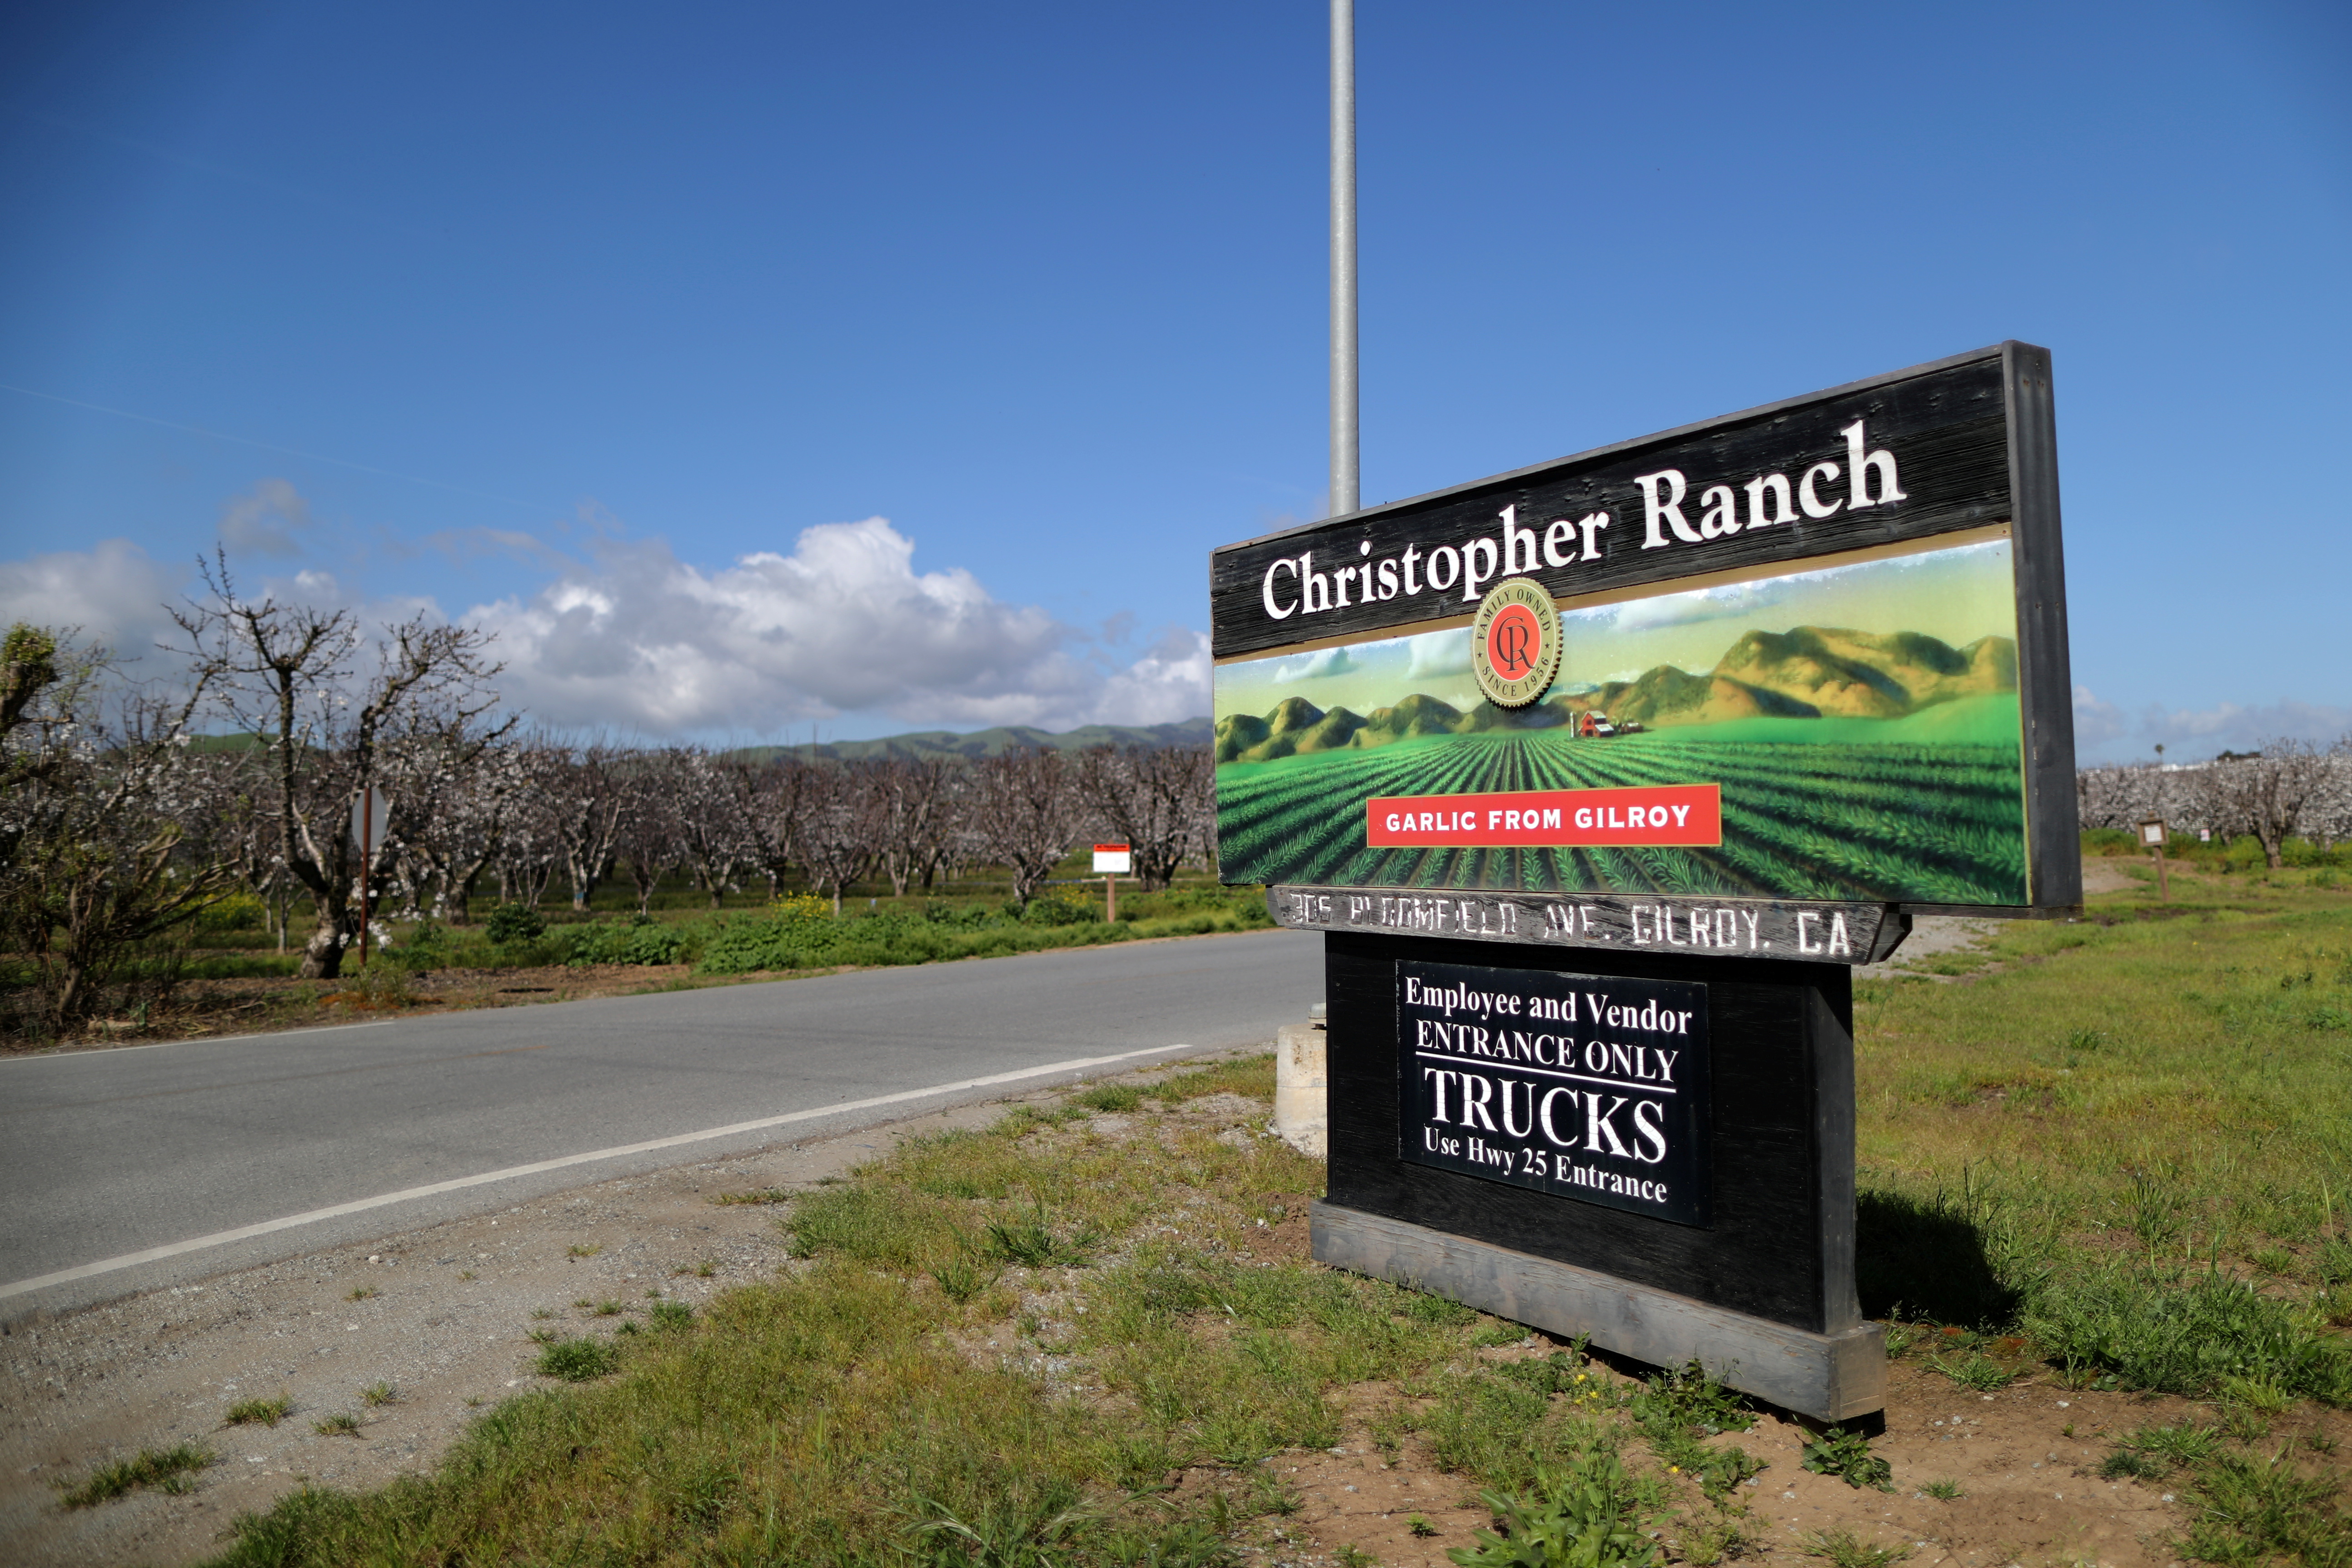 The entrance to Christopher Ranch garlic farm is seen in Gilroy